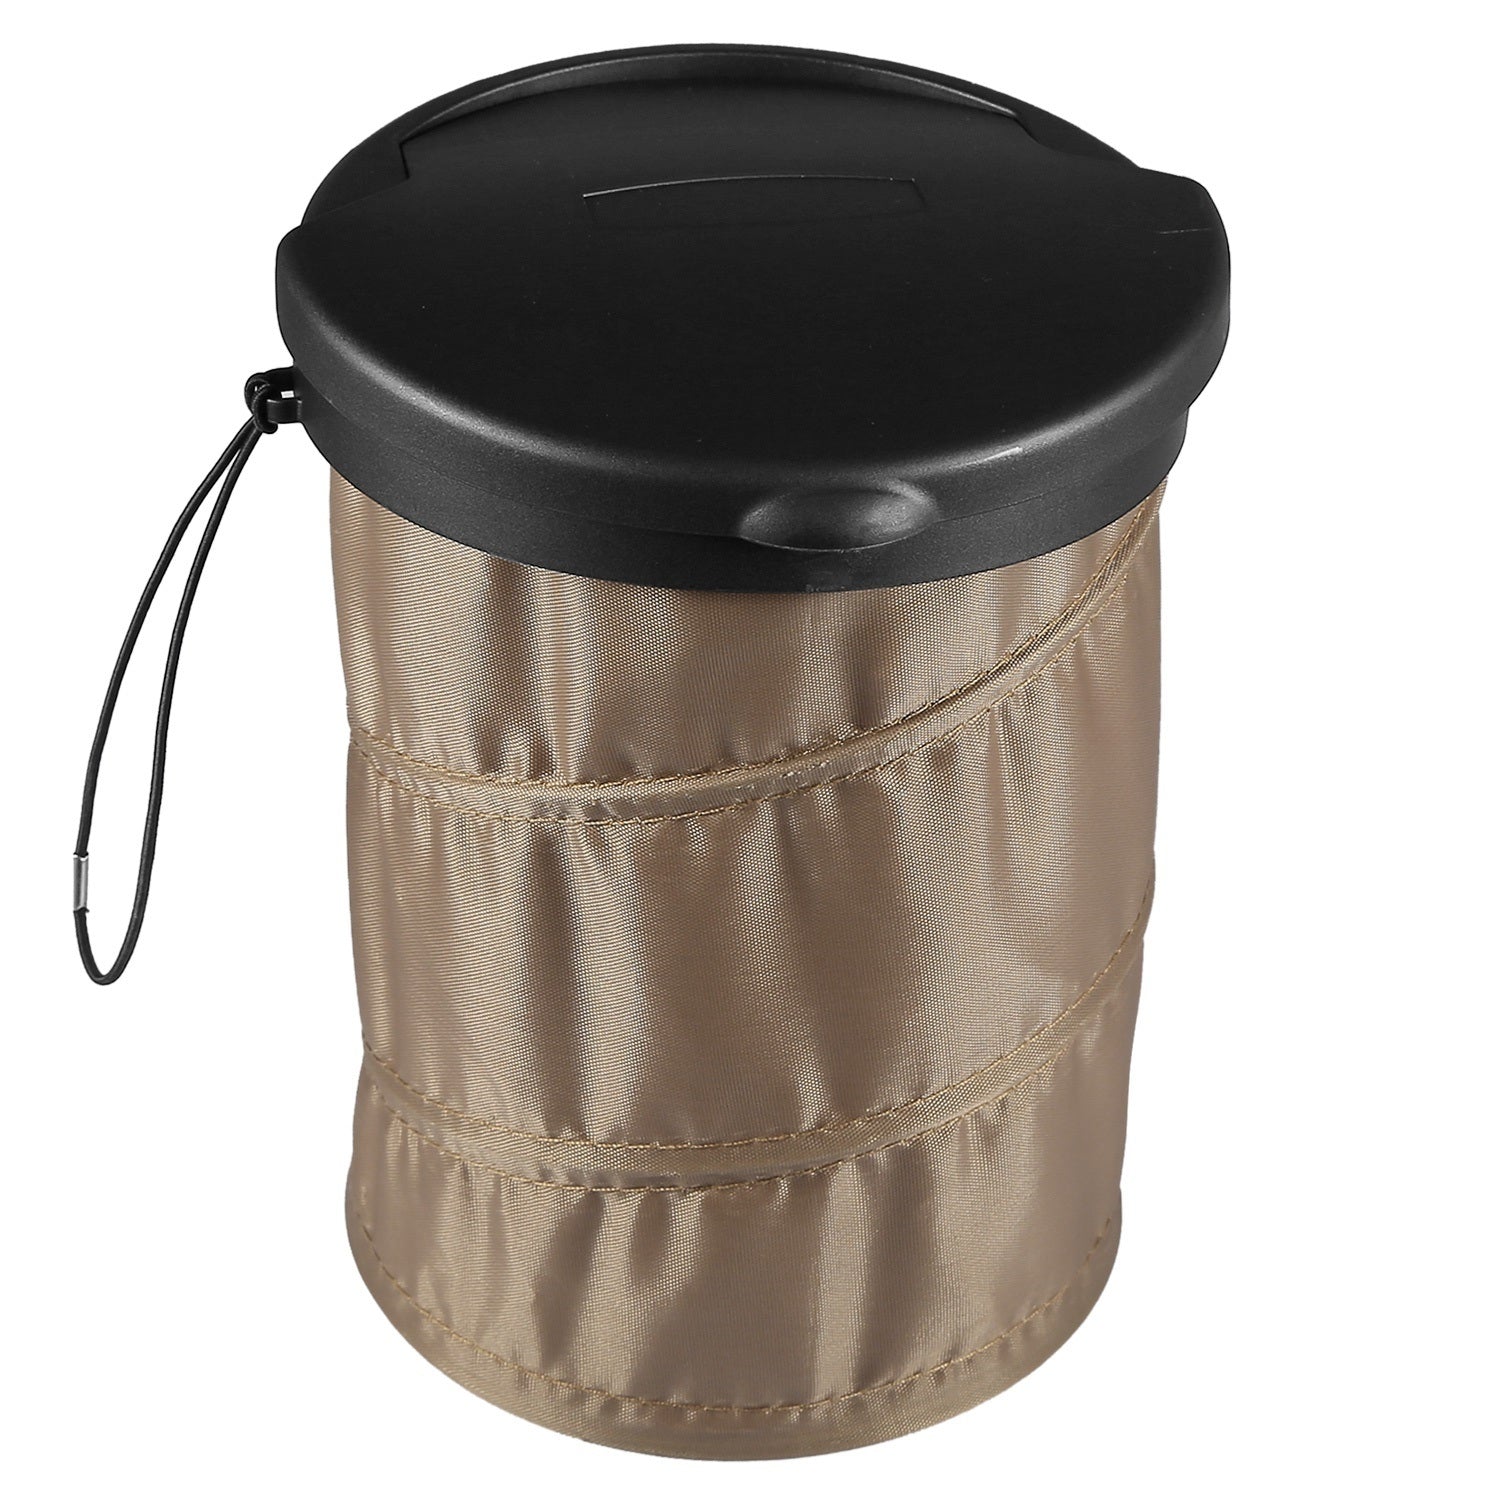 Universal Car Trash Can Portable Car Garbage Bin Foldable Pop up Trash Can with Cover Leak Proof - Moorescarts